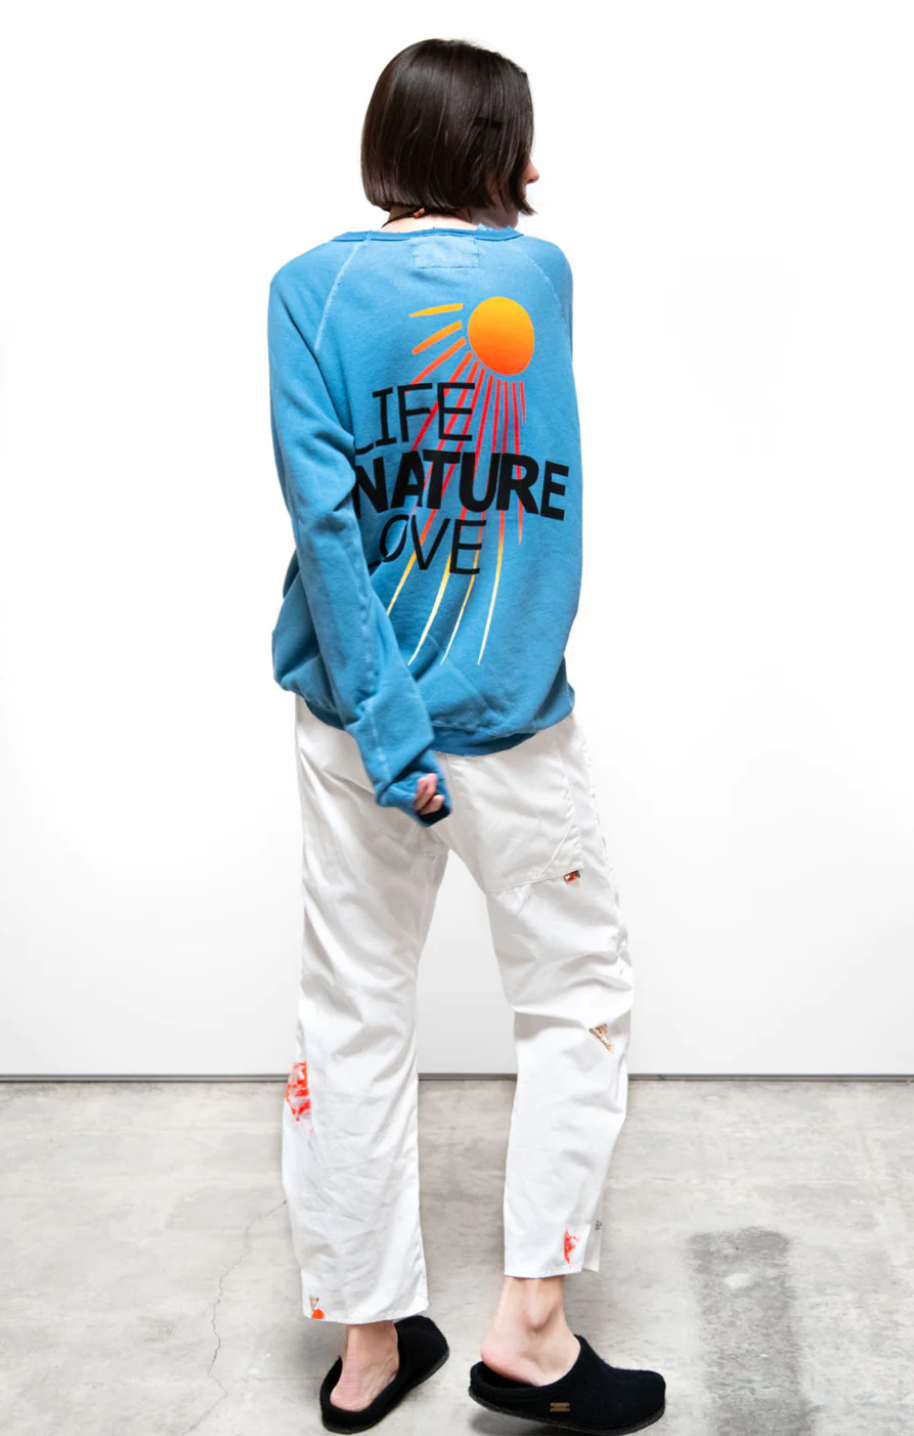 A person stands with their back towards the camera, wearing a LNLSUN SUPERYUMM BIGGIE raglan sweatshirt from Free City (sparrow, LLC) with the text "LIFE, NATURE, LOVE" and a graphic of a sun, paired with white, distressed jeans and black slippers in Arizona style.